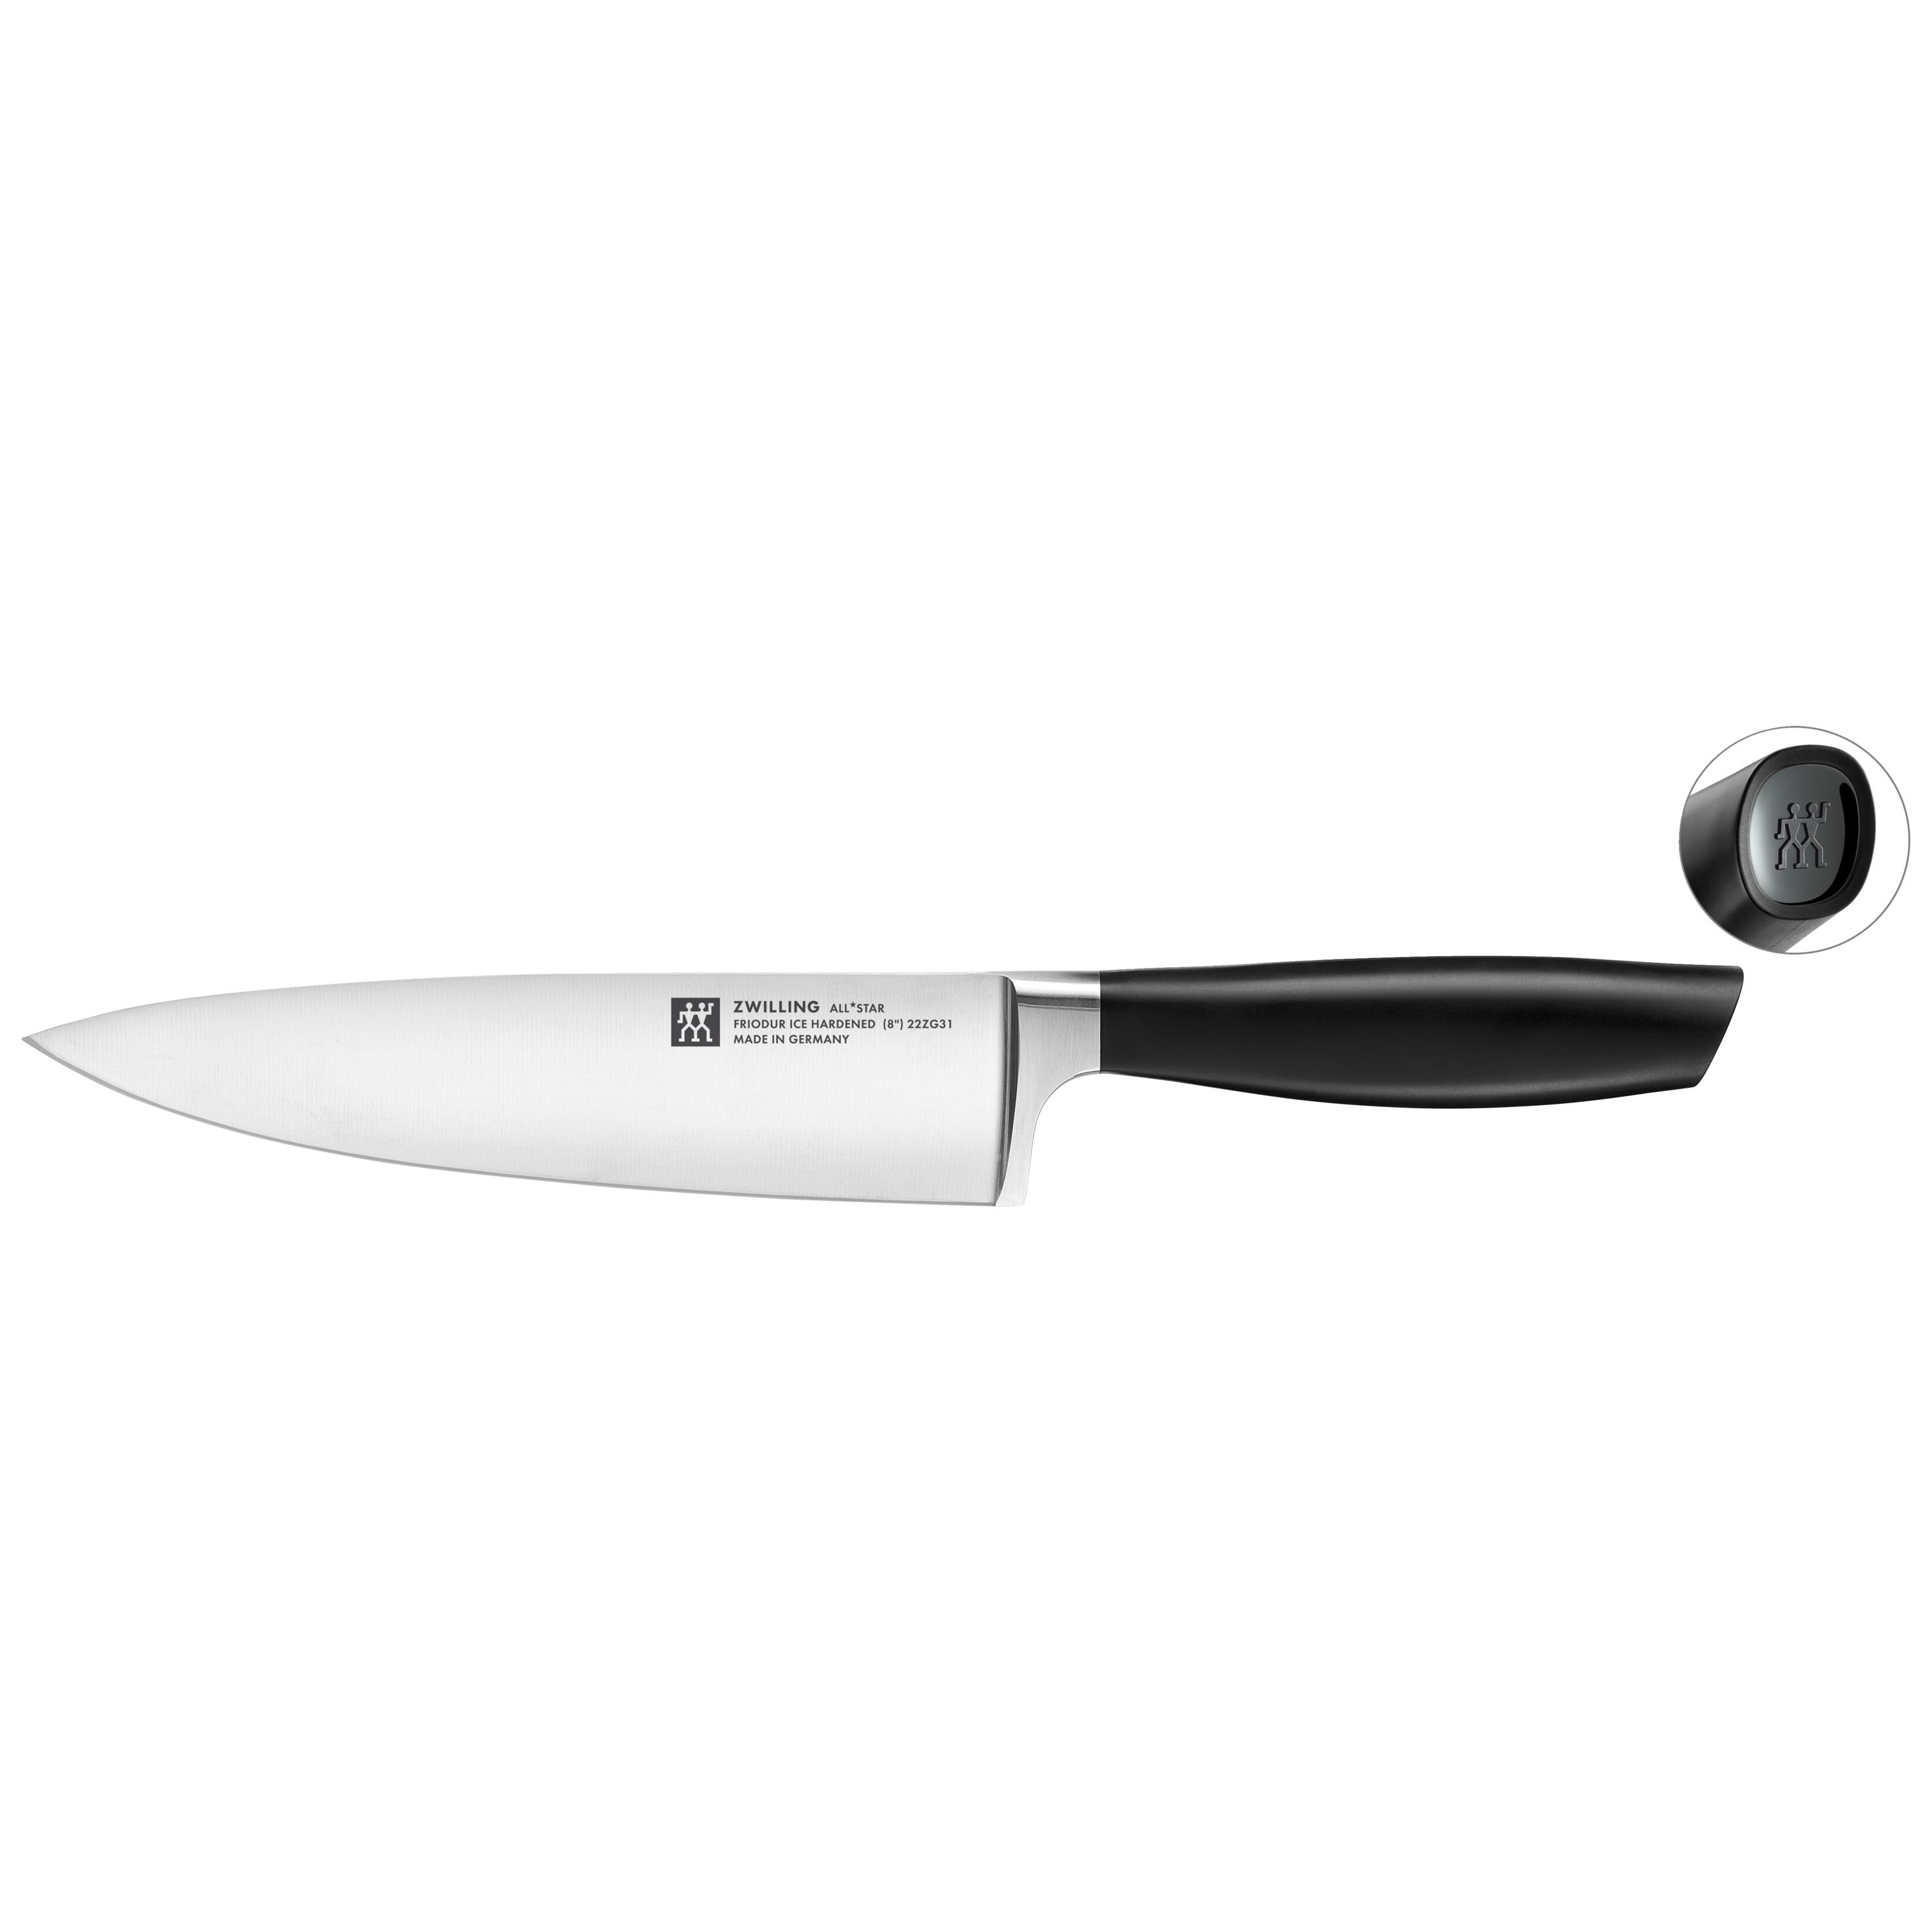 Zwilling All * Star 8-inch, Chef's Knife, Silver